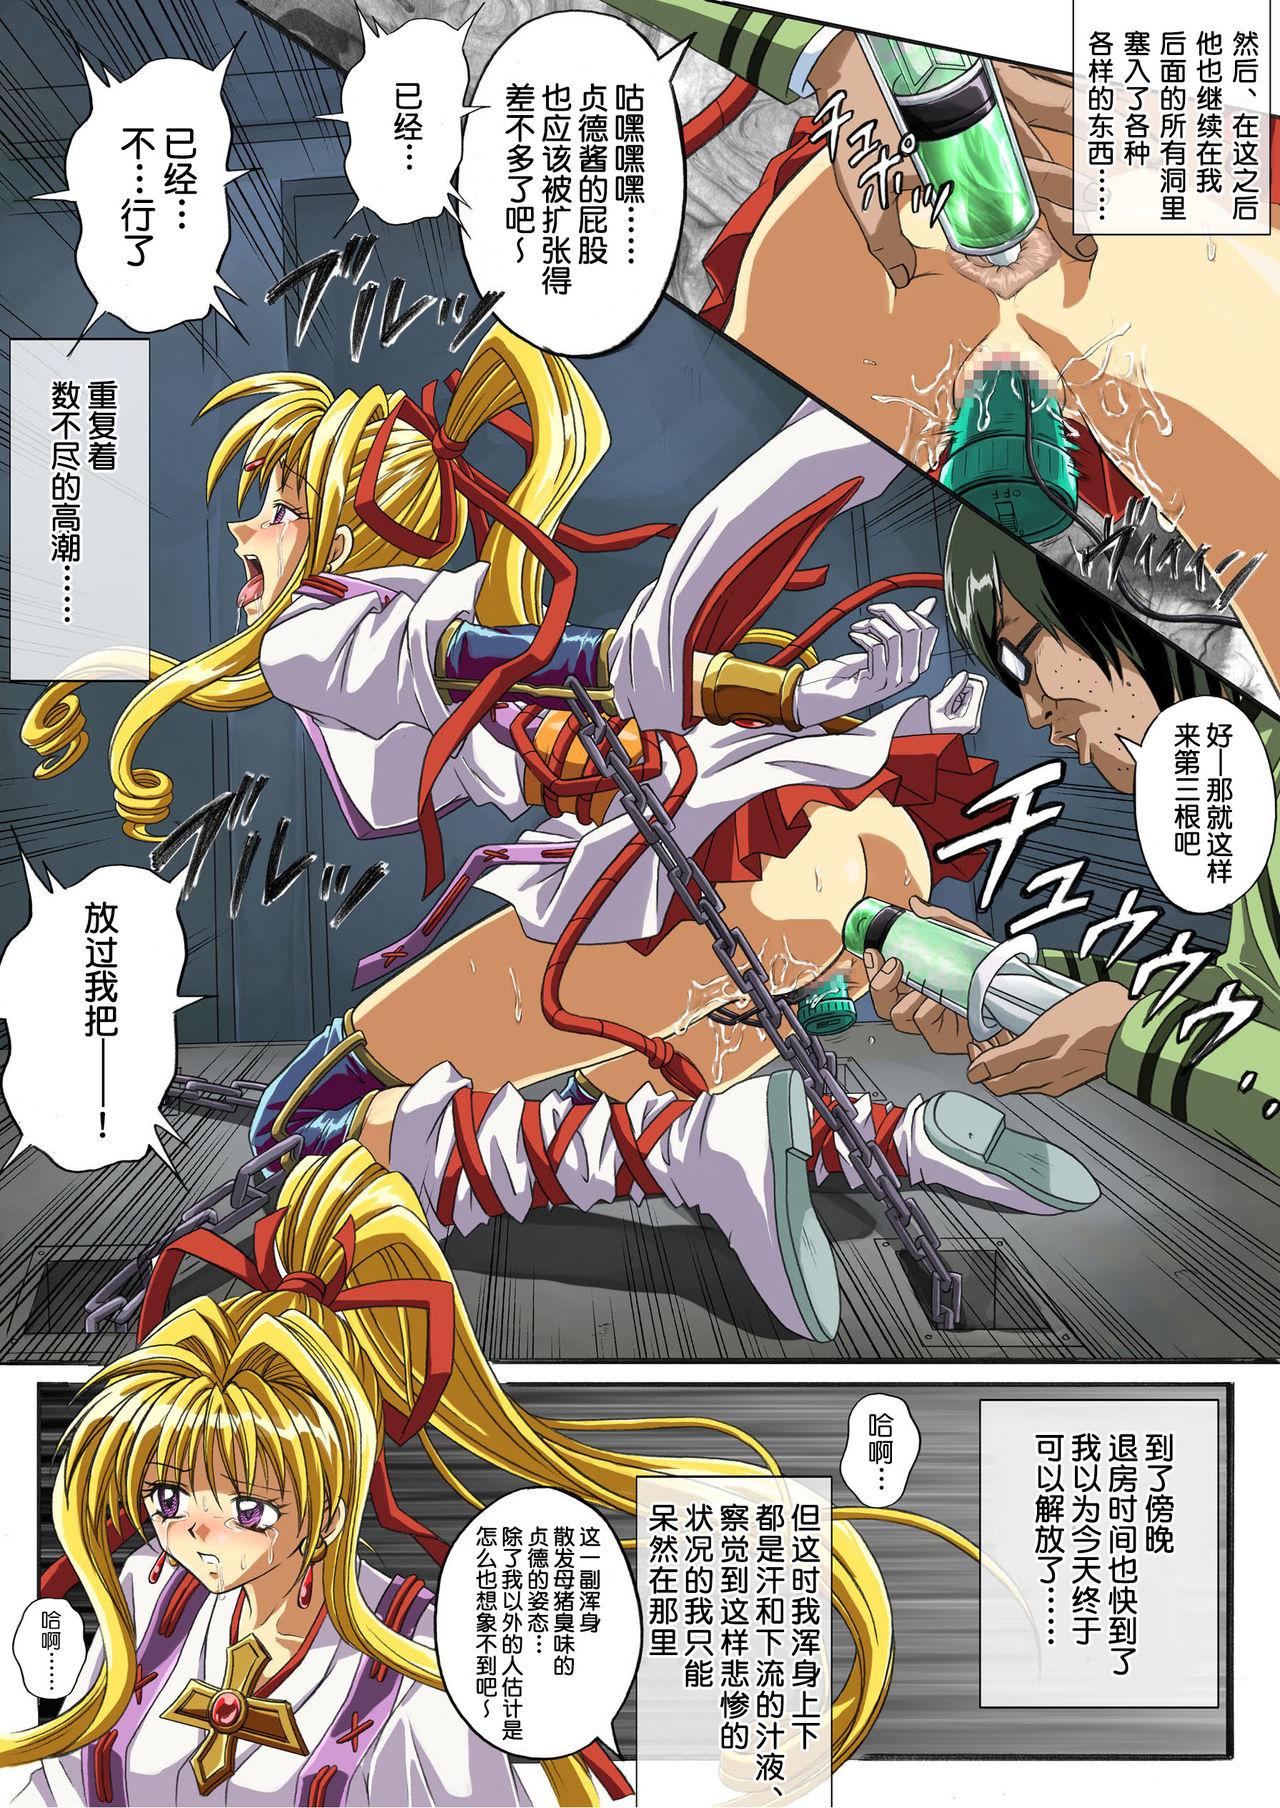 Japan Rogue Spear 208 Download edition - Kamikaze kaitou jeanne Online - Page 215